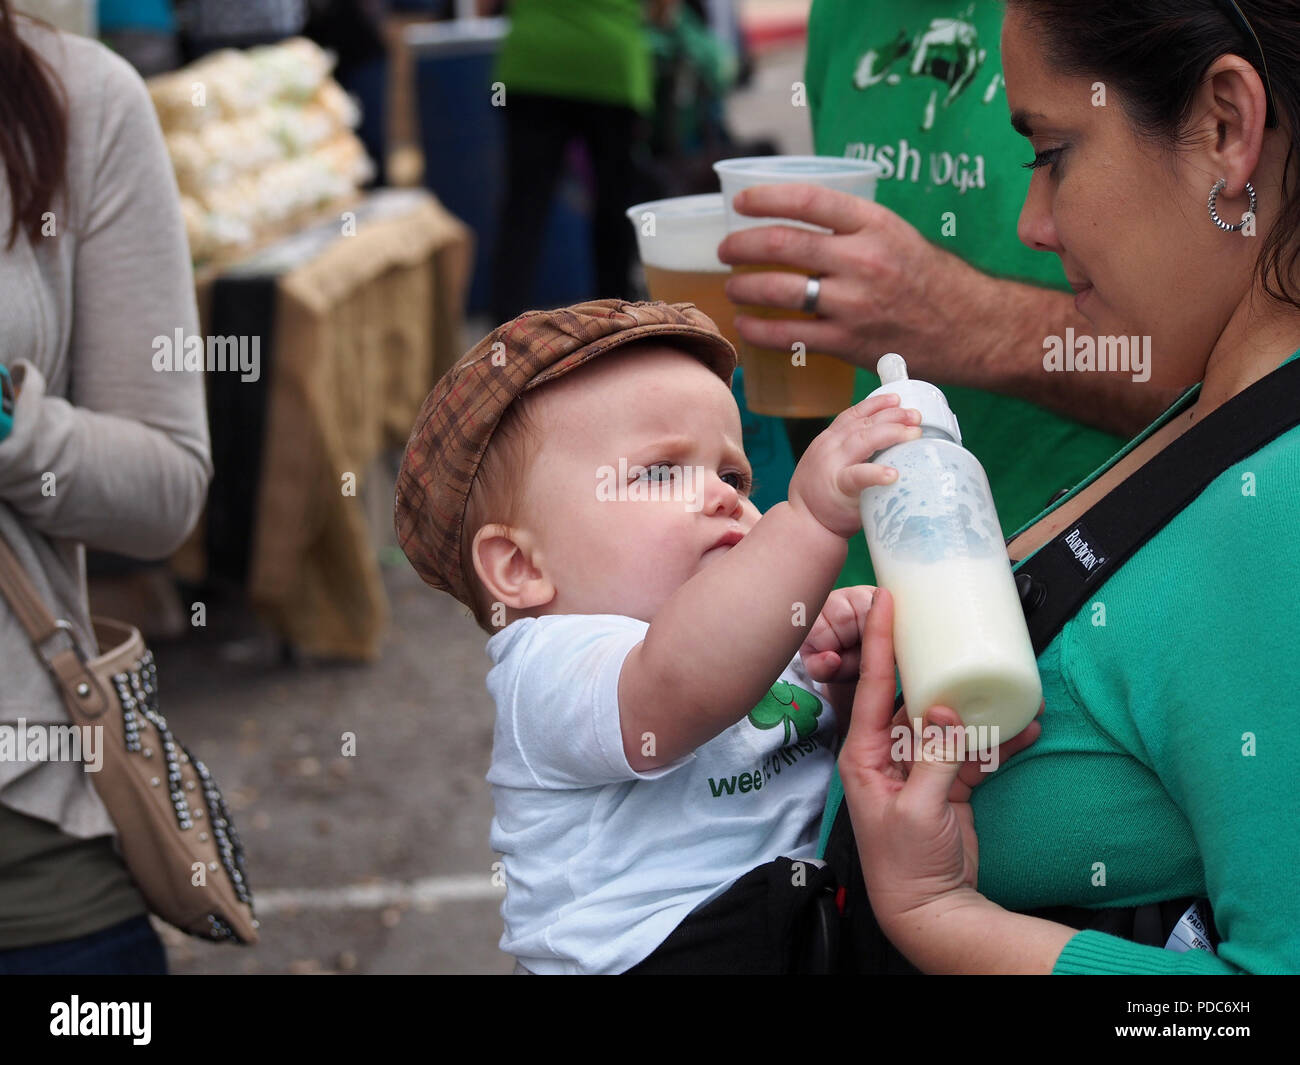 A baby boy in a tweed cap reaches for his bottle under his Mother's loving gaze. St. Patrick's Day Block Festival in Corpus Christi, Texas USA. Stock Photo